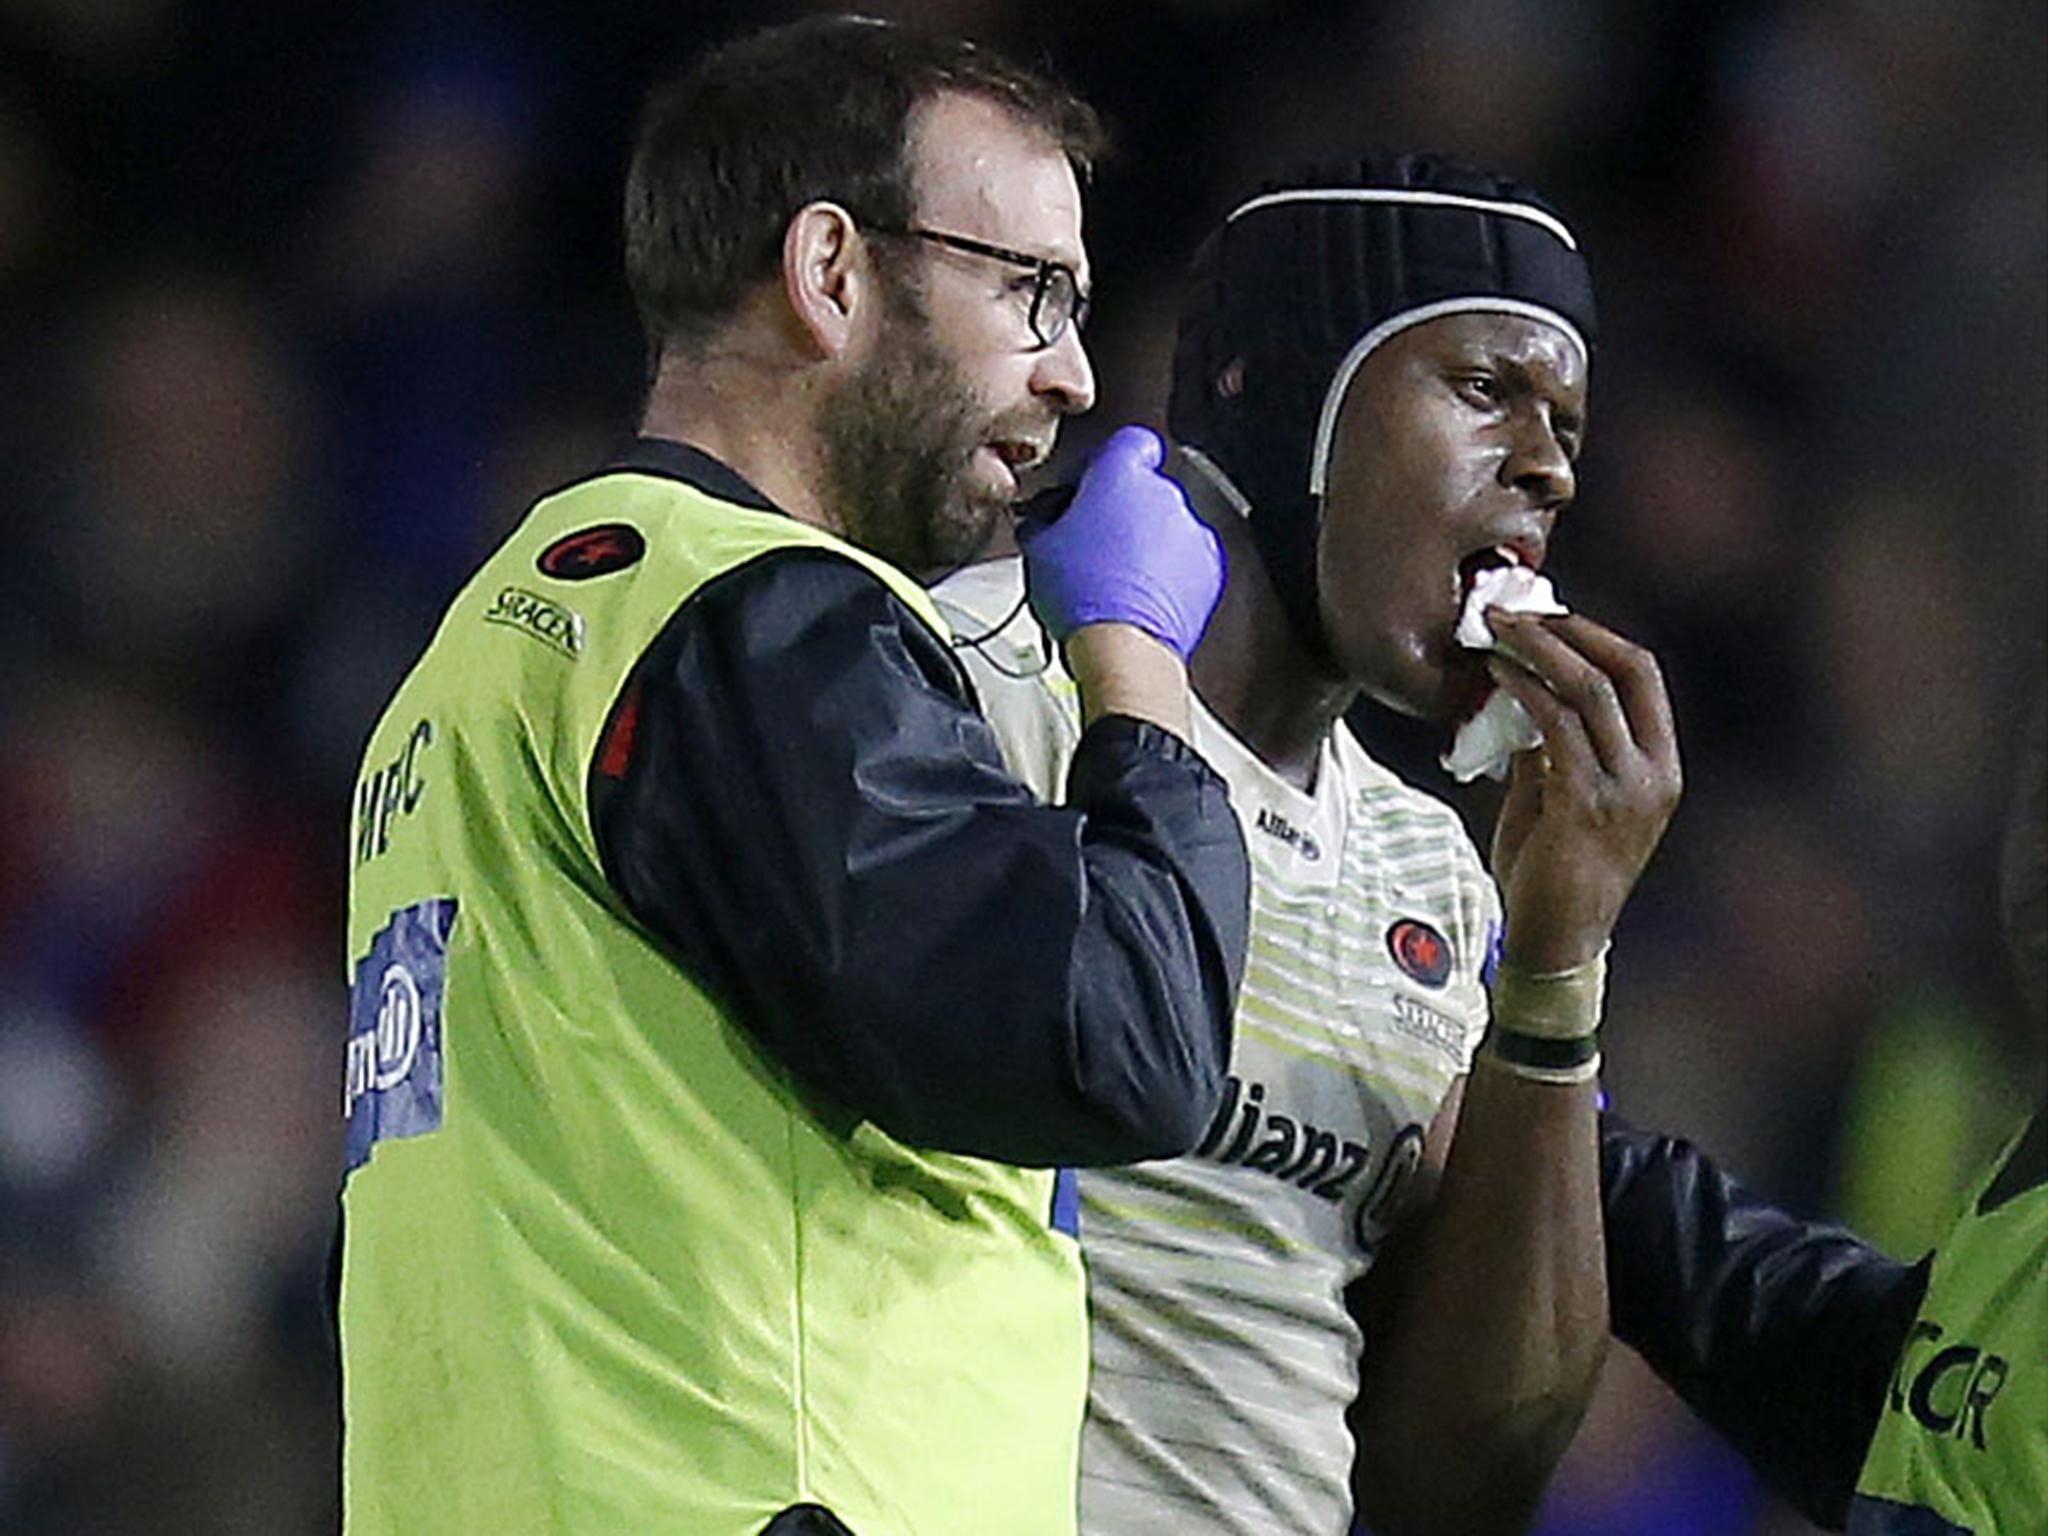 &#13;
Itoje played 12 of 14 possible matches despite hopes that he would be rested &#13;